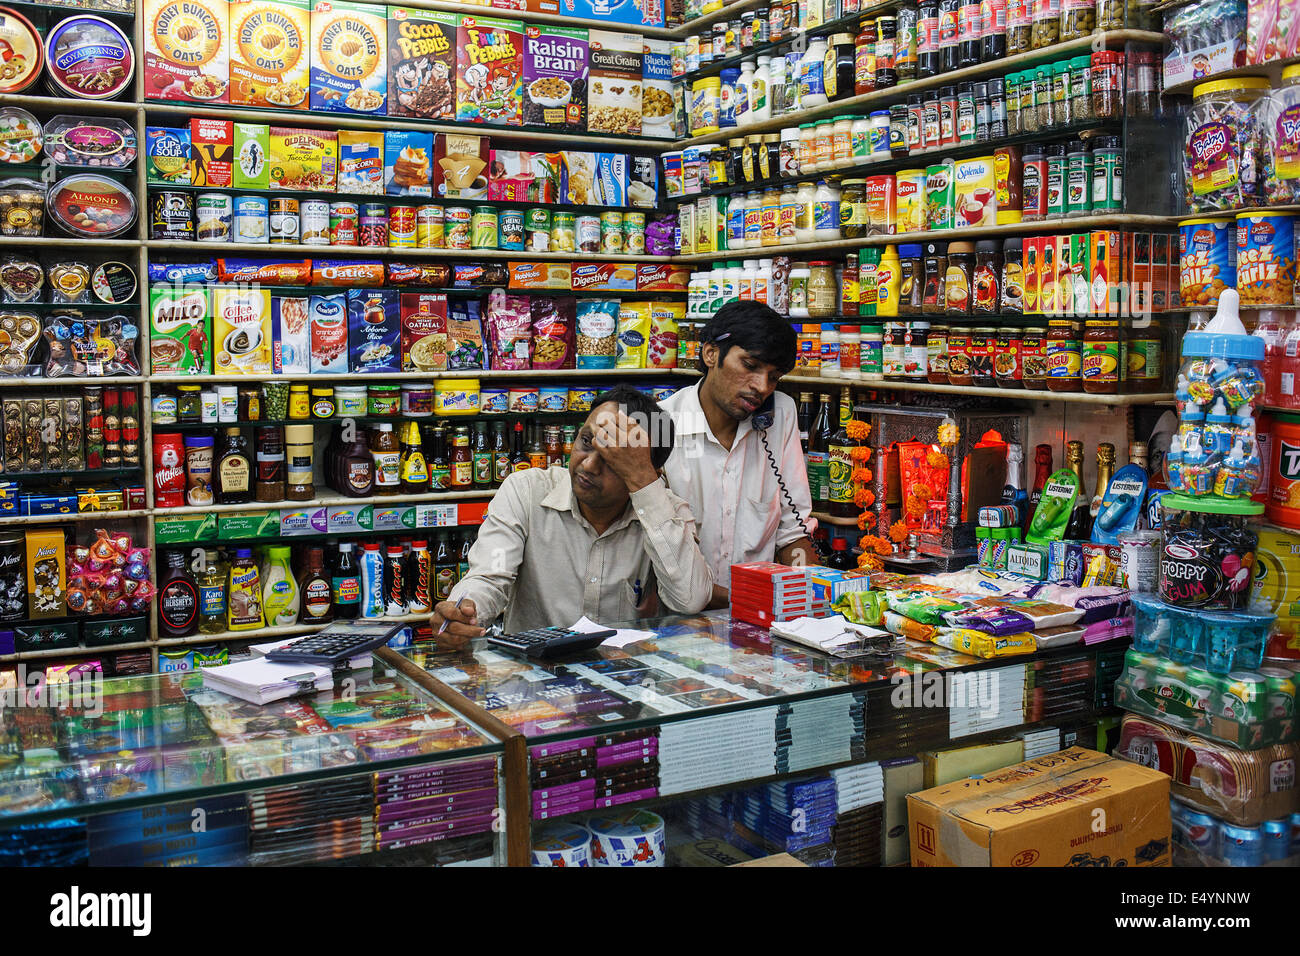 Shopkeepers in their grocery shop at Crawford Market in Mumbai, India. Stock Photo